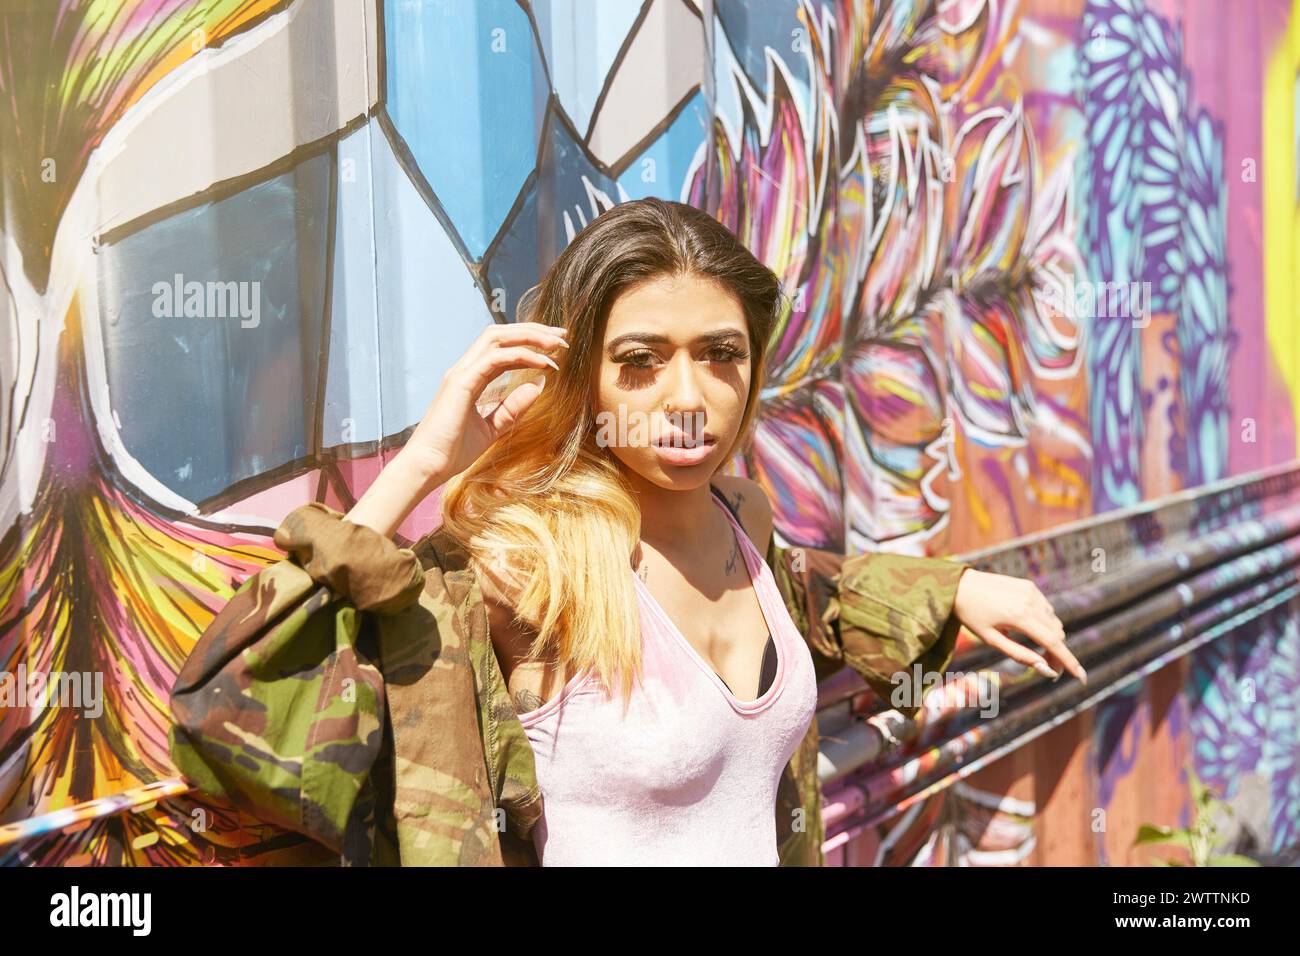 Woman posing in front of colorful graffiti wall Stock Photo